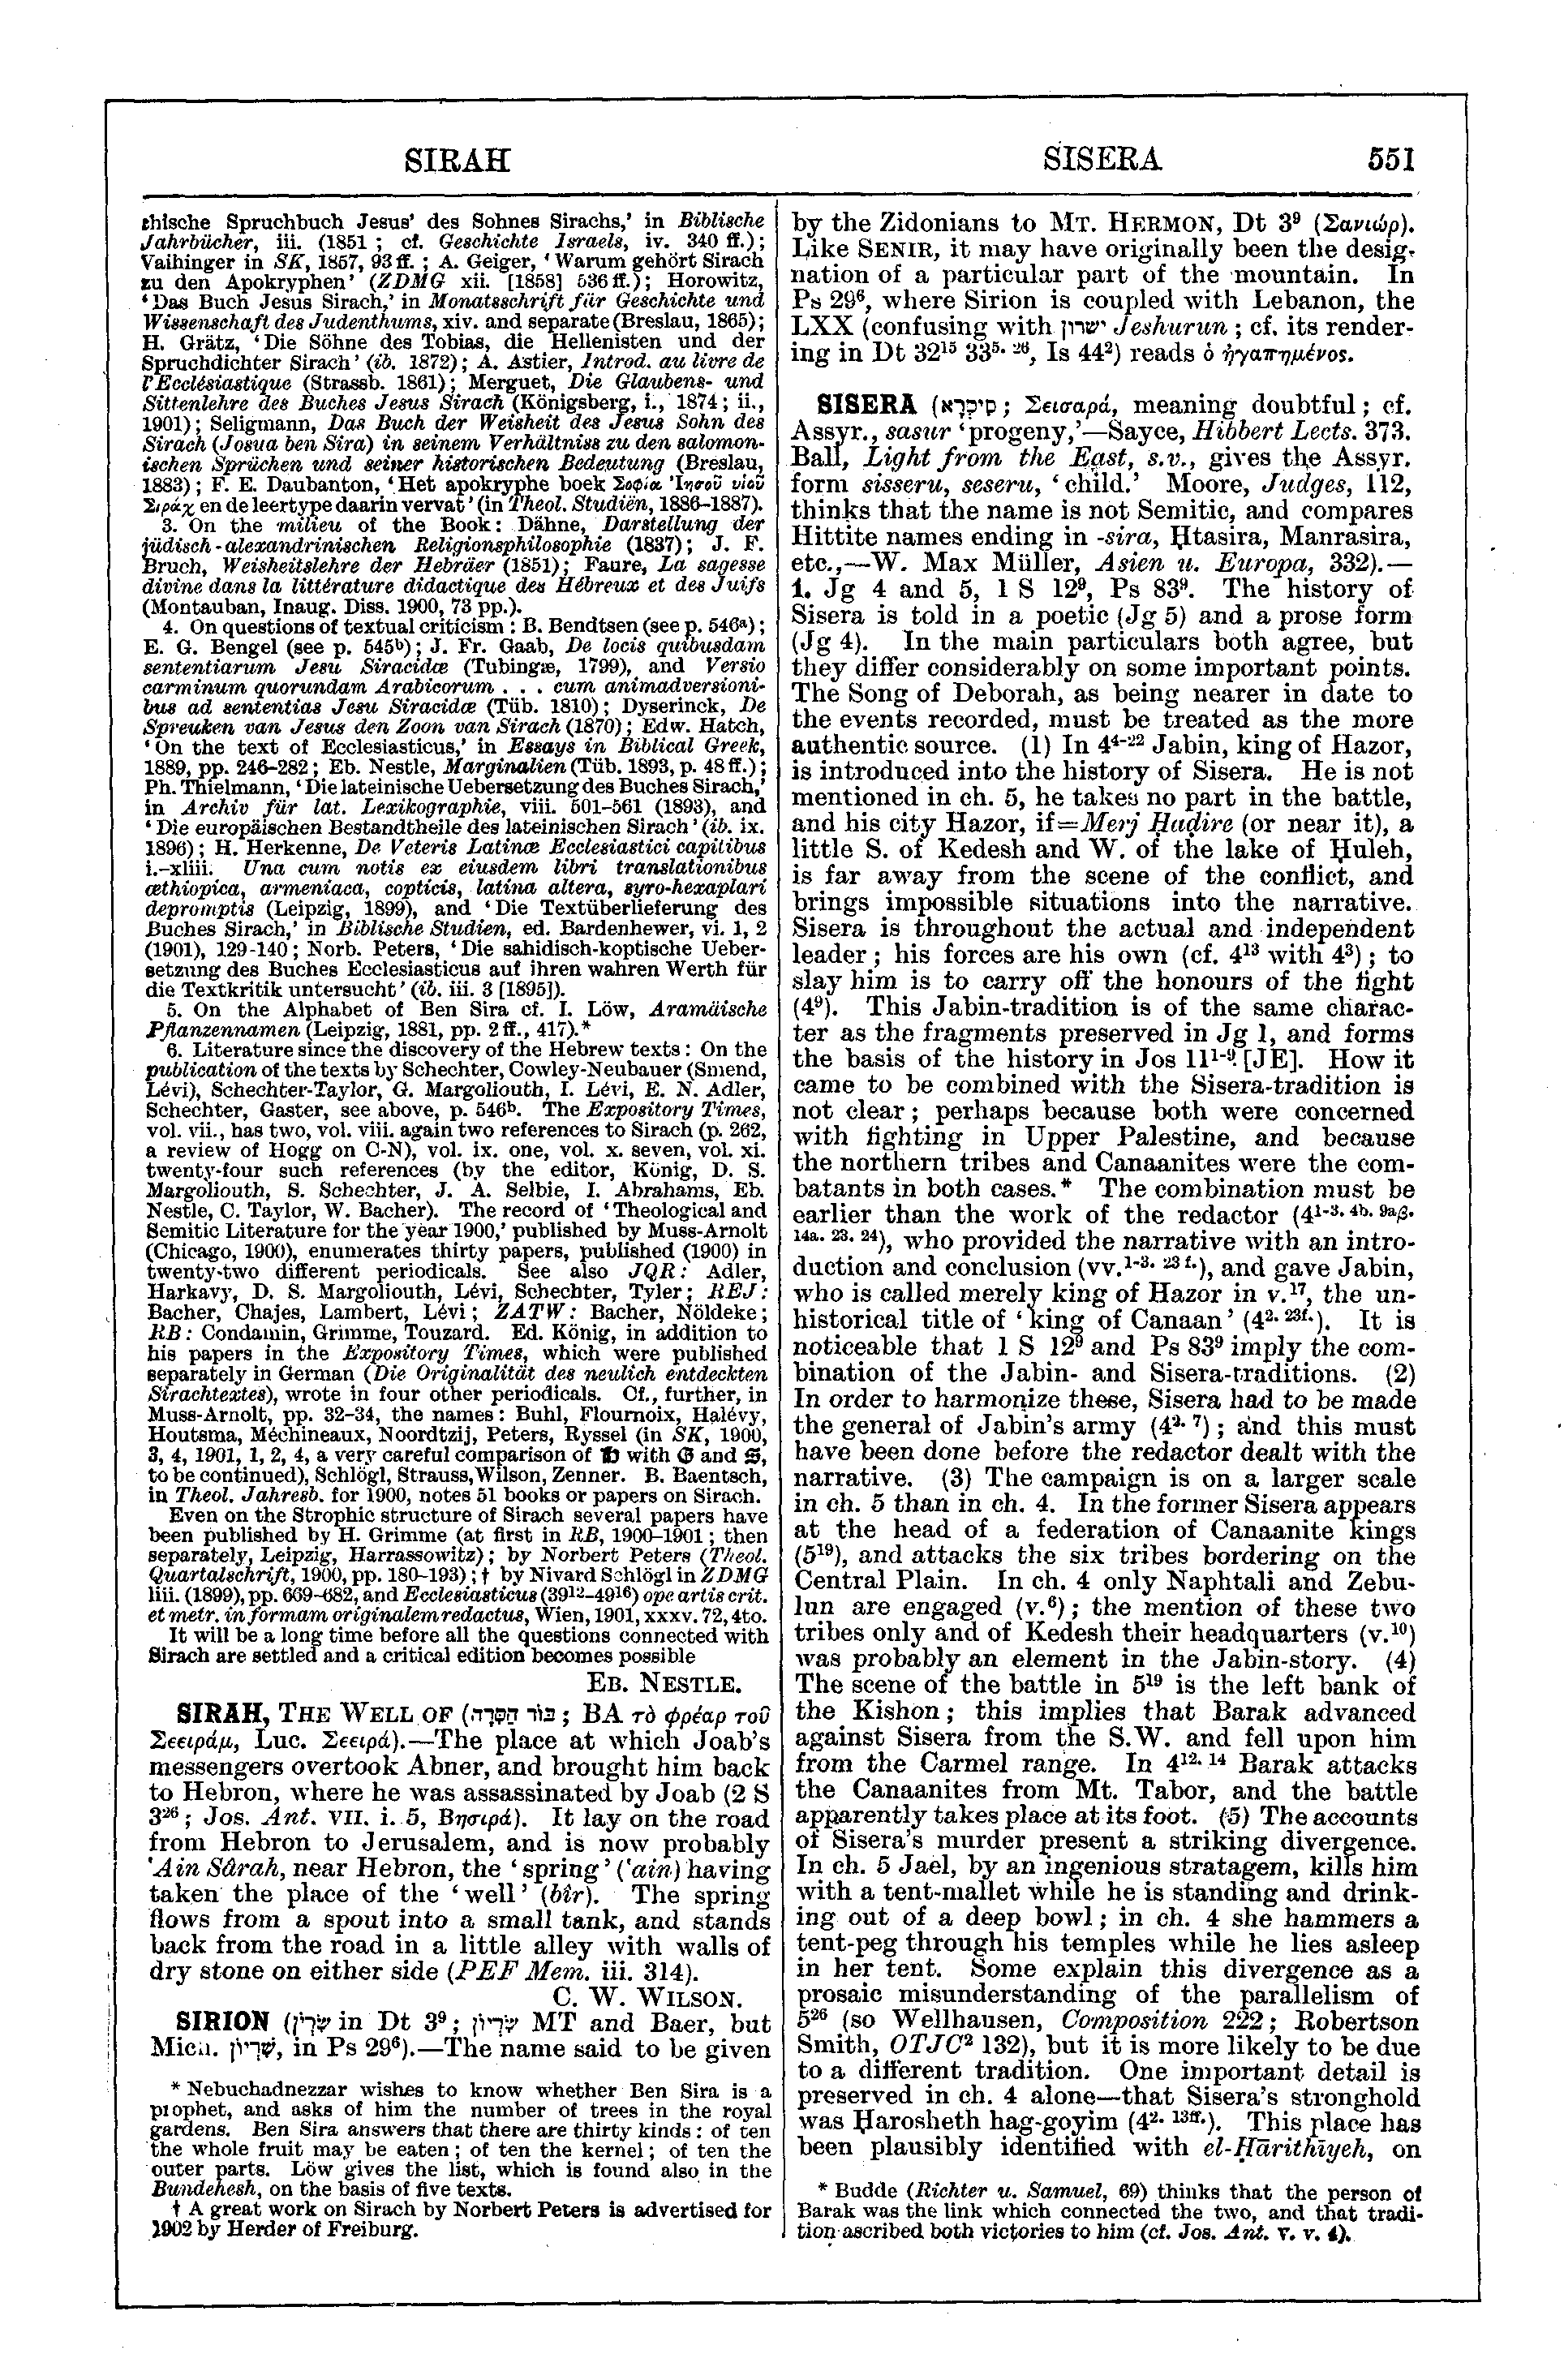 Image of page 551